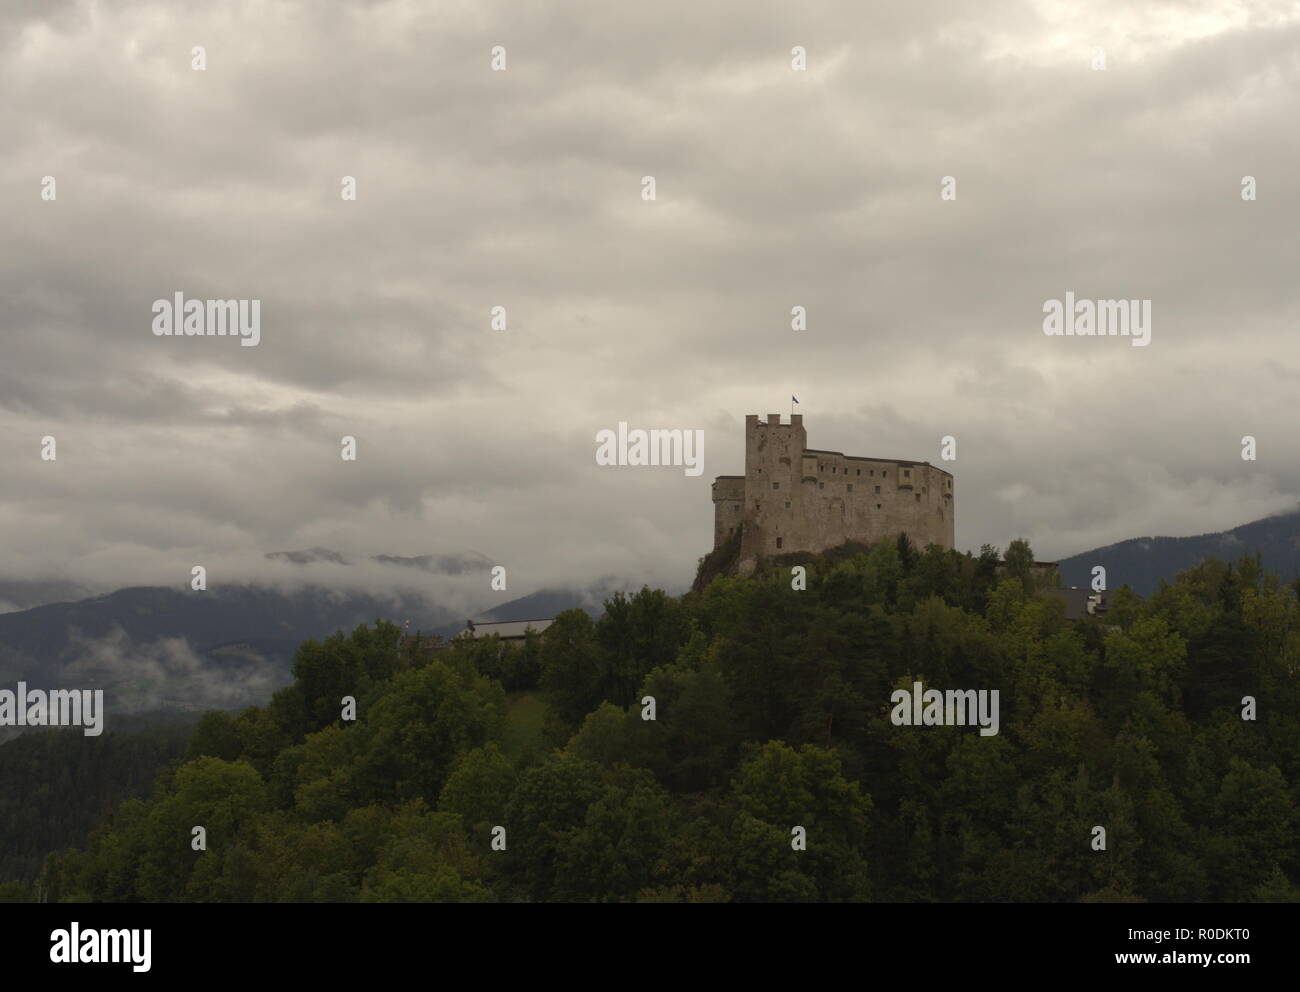 View on an old fortress in a mountain landscape with forest and meadows Stock Photo